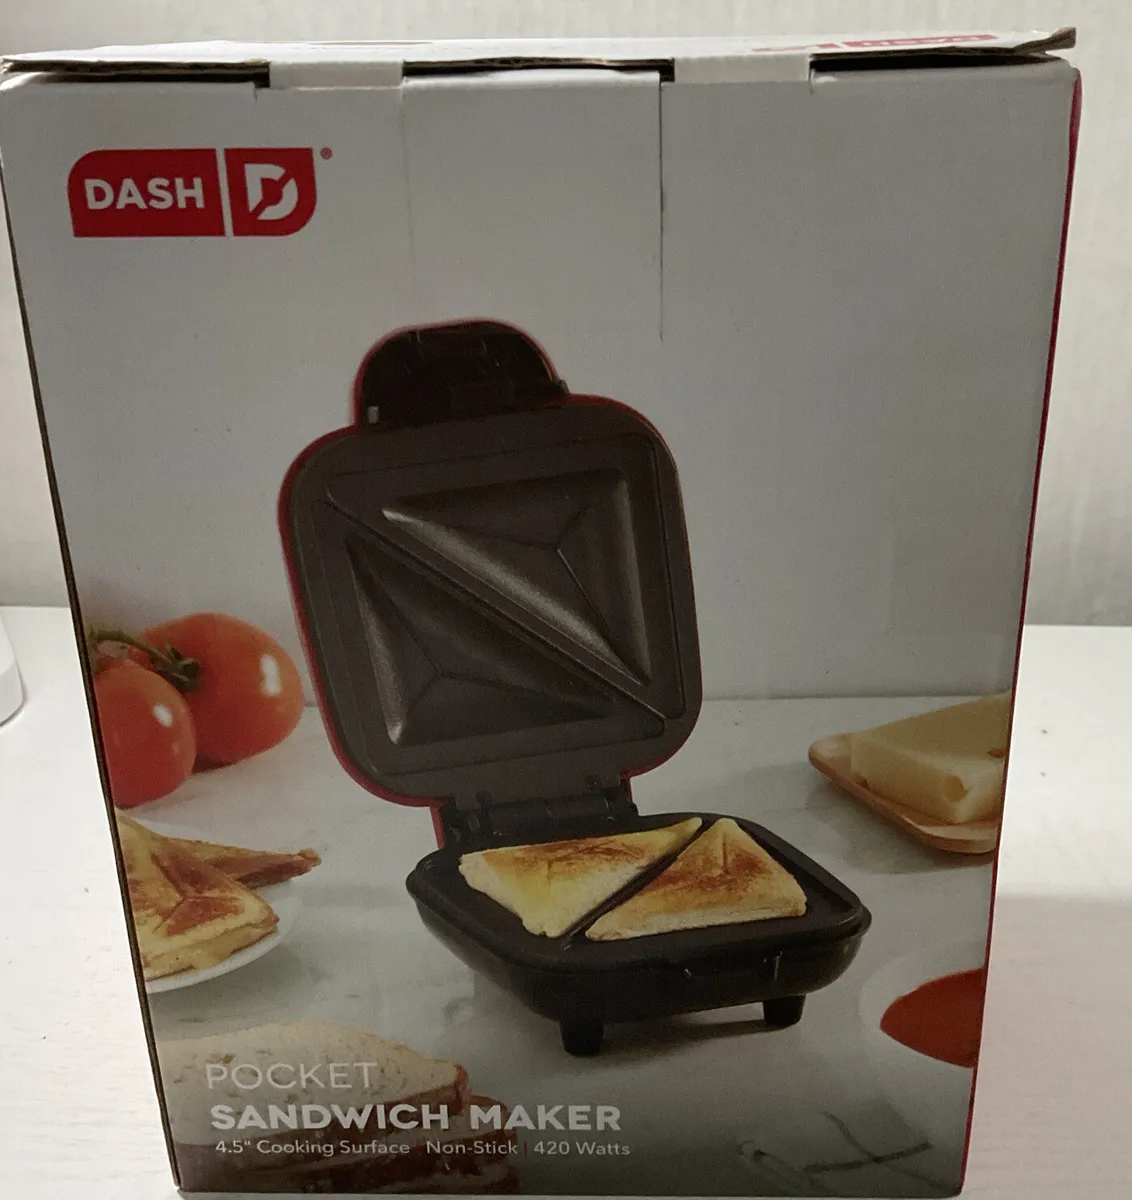 Dash Pocket Sandwich Panini Maker Nonstick 4.5 inch Cooking Surface w/  Recipes!